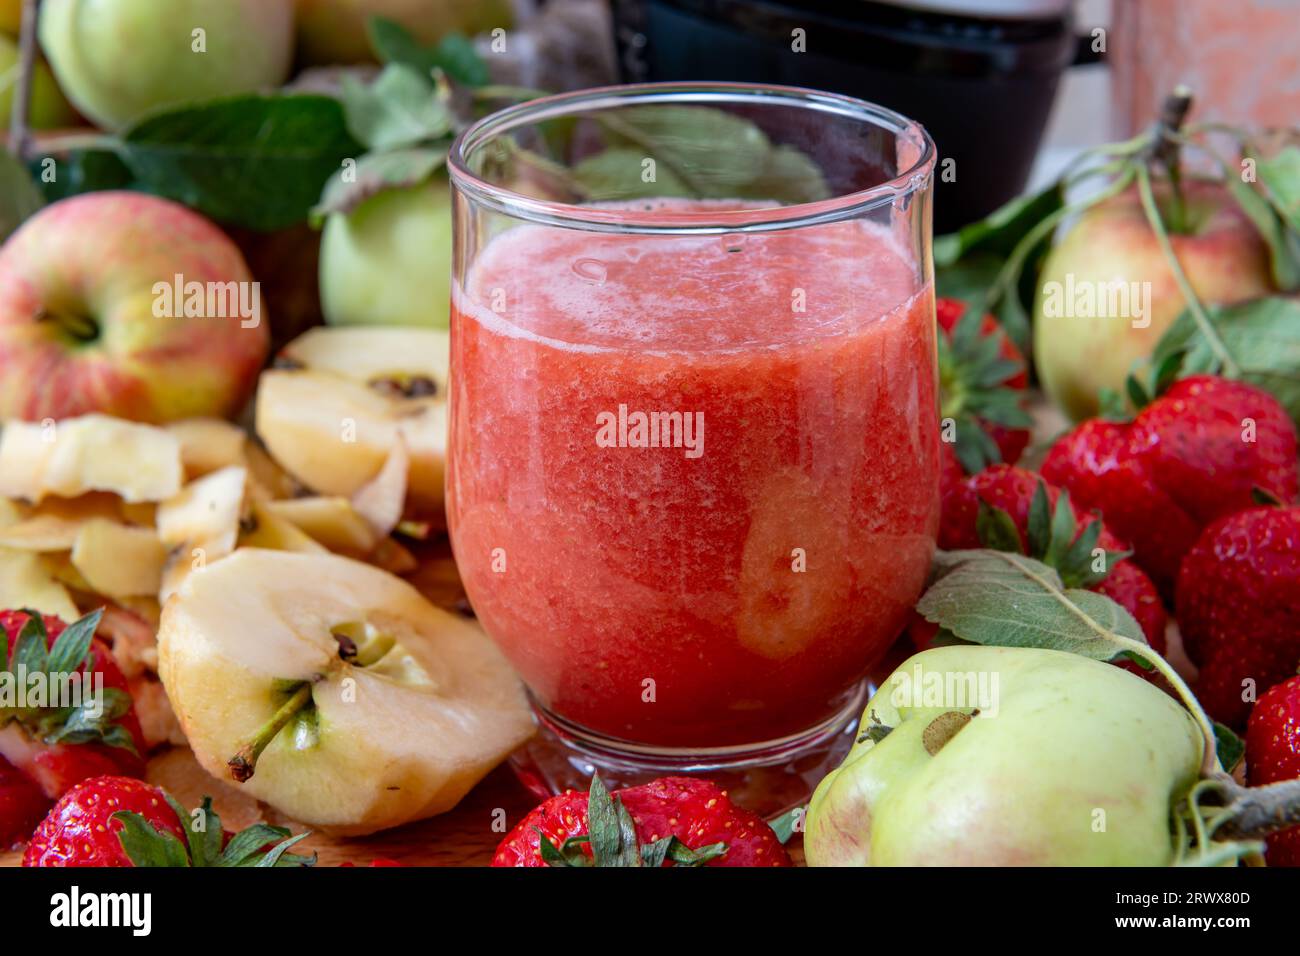 A glass of smoothie made with fresh fruits. Healthy living, lifestyle concept. Stock Photo